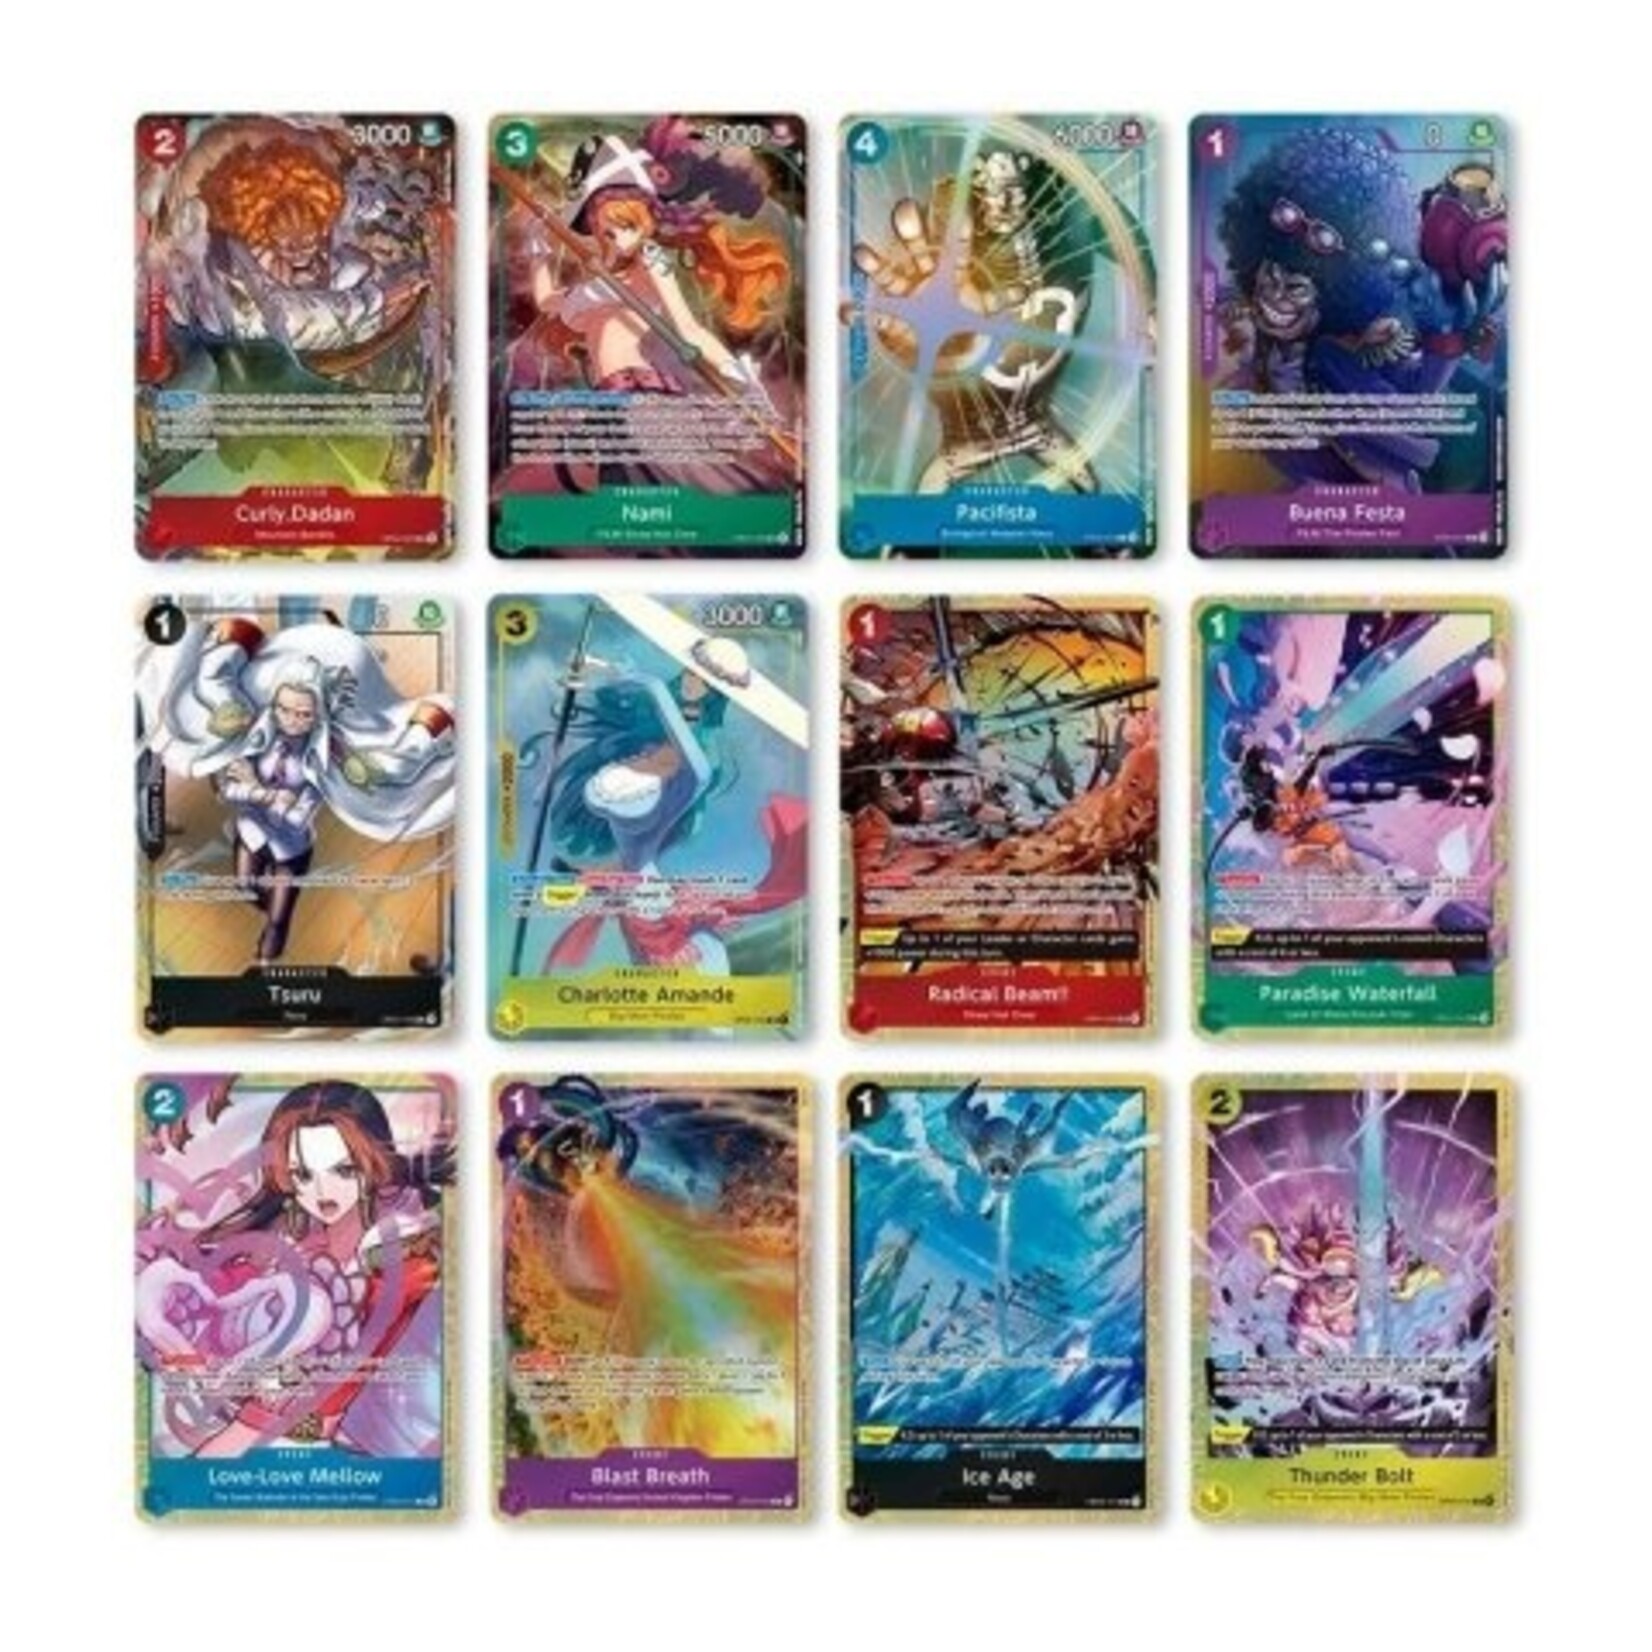 One Piece Card Game Premium Card Collection -Best Selection - EN